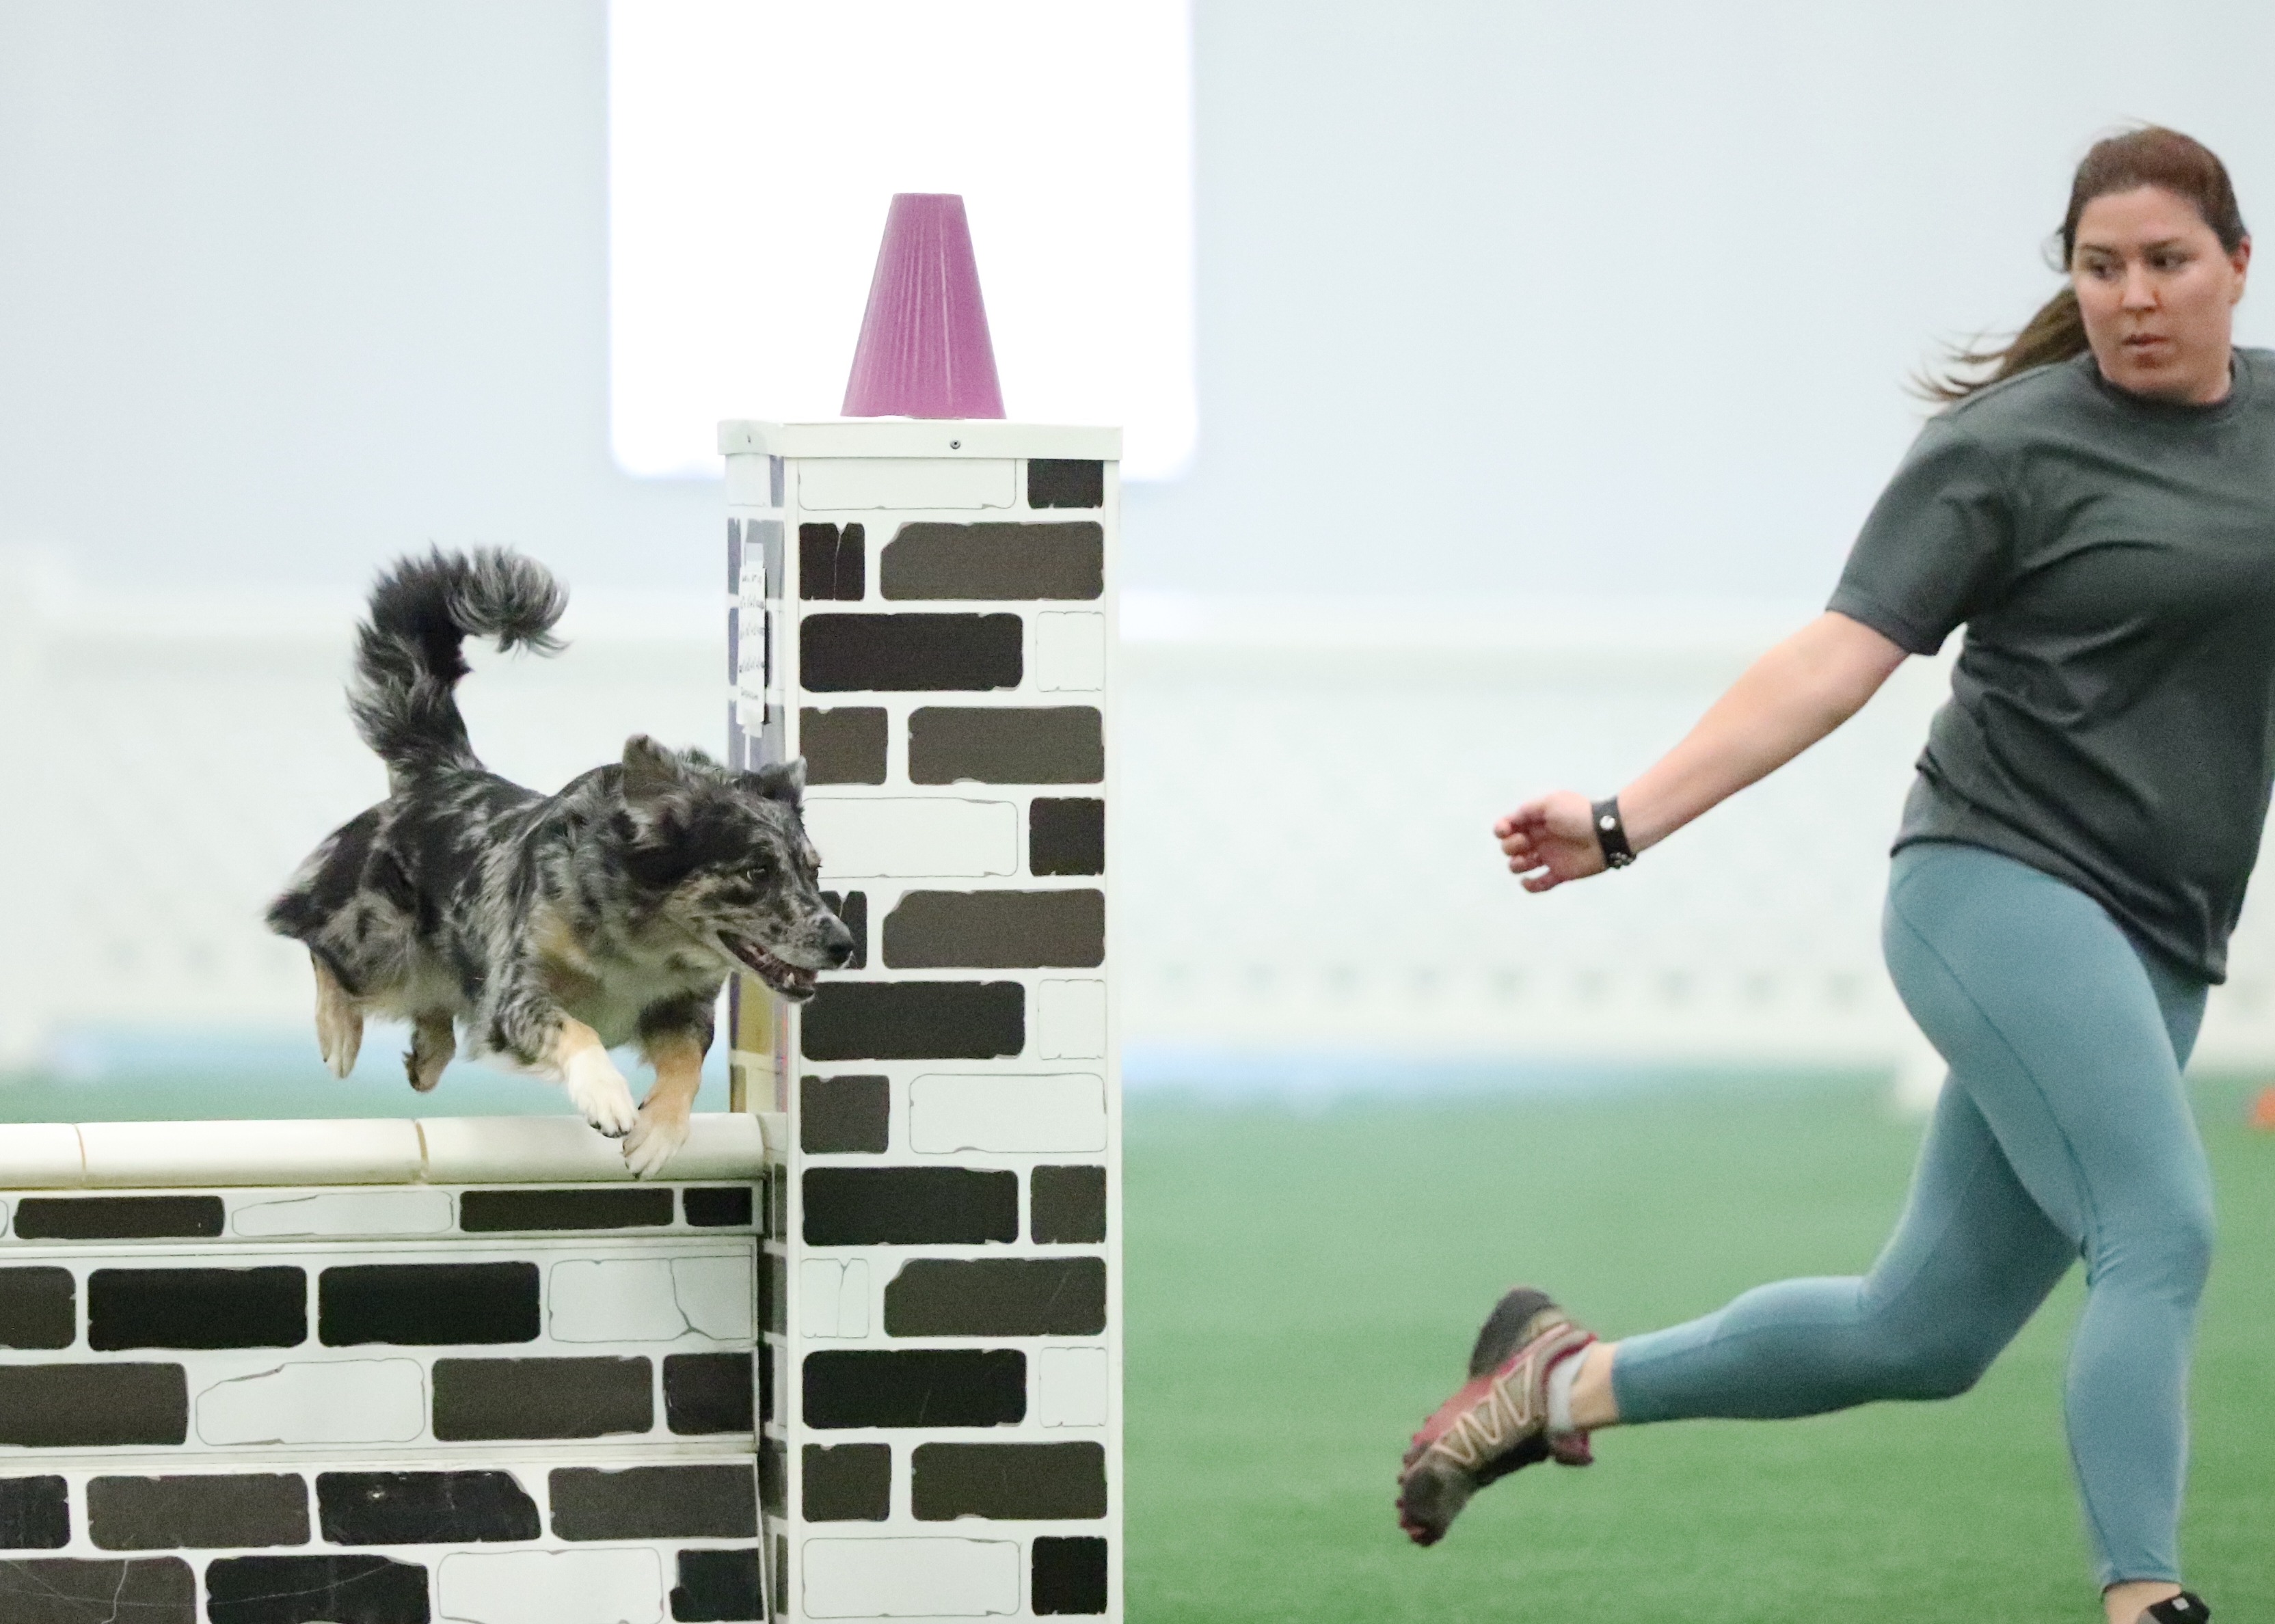 A white woman in a gray t-shirt and light blue leggings looks over her right shoulder with her right arm back and hand in a loose fist. She is looking at a blue merle Australian Shepherd jumping over a wall jump agility obstacle. The wall jump is black and white bricked. There is a dark pink cone on top of the right side tower of the wall. The ground is green and the background wall is white.